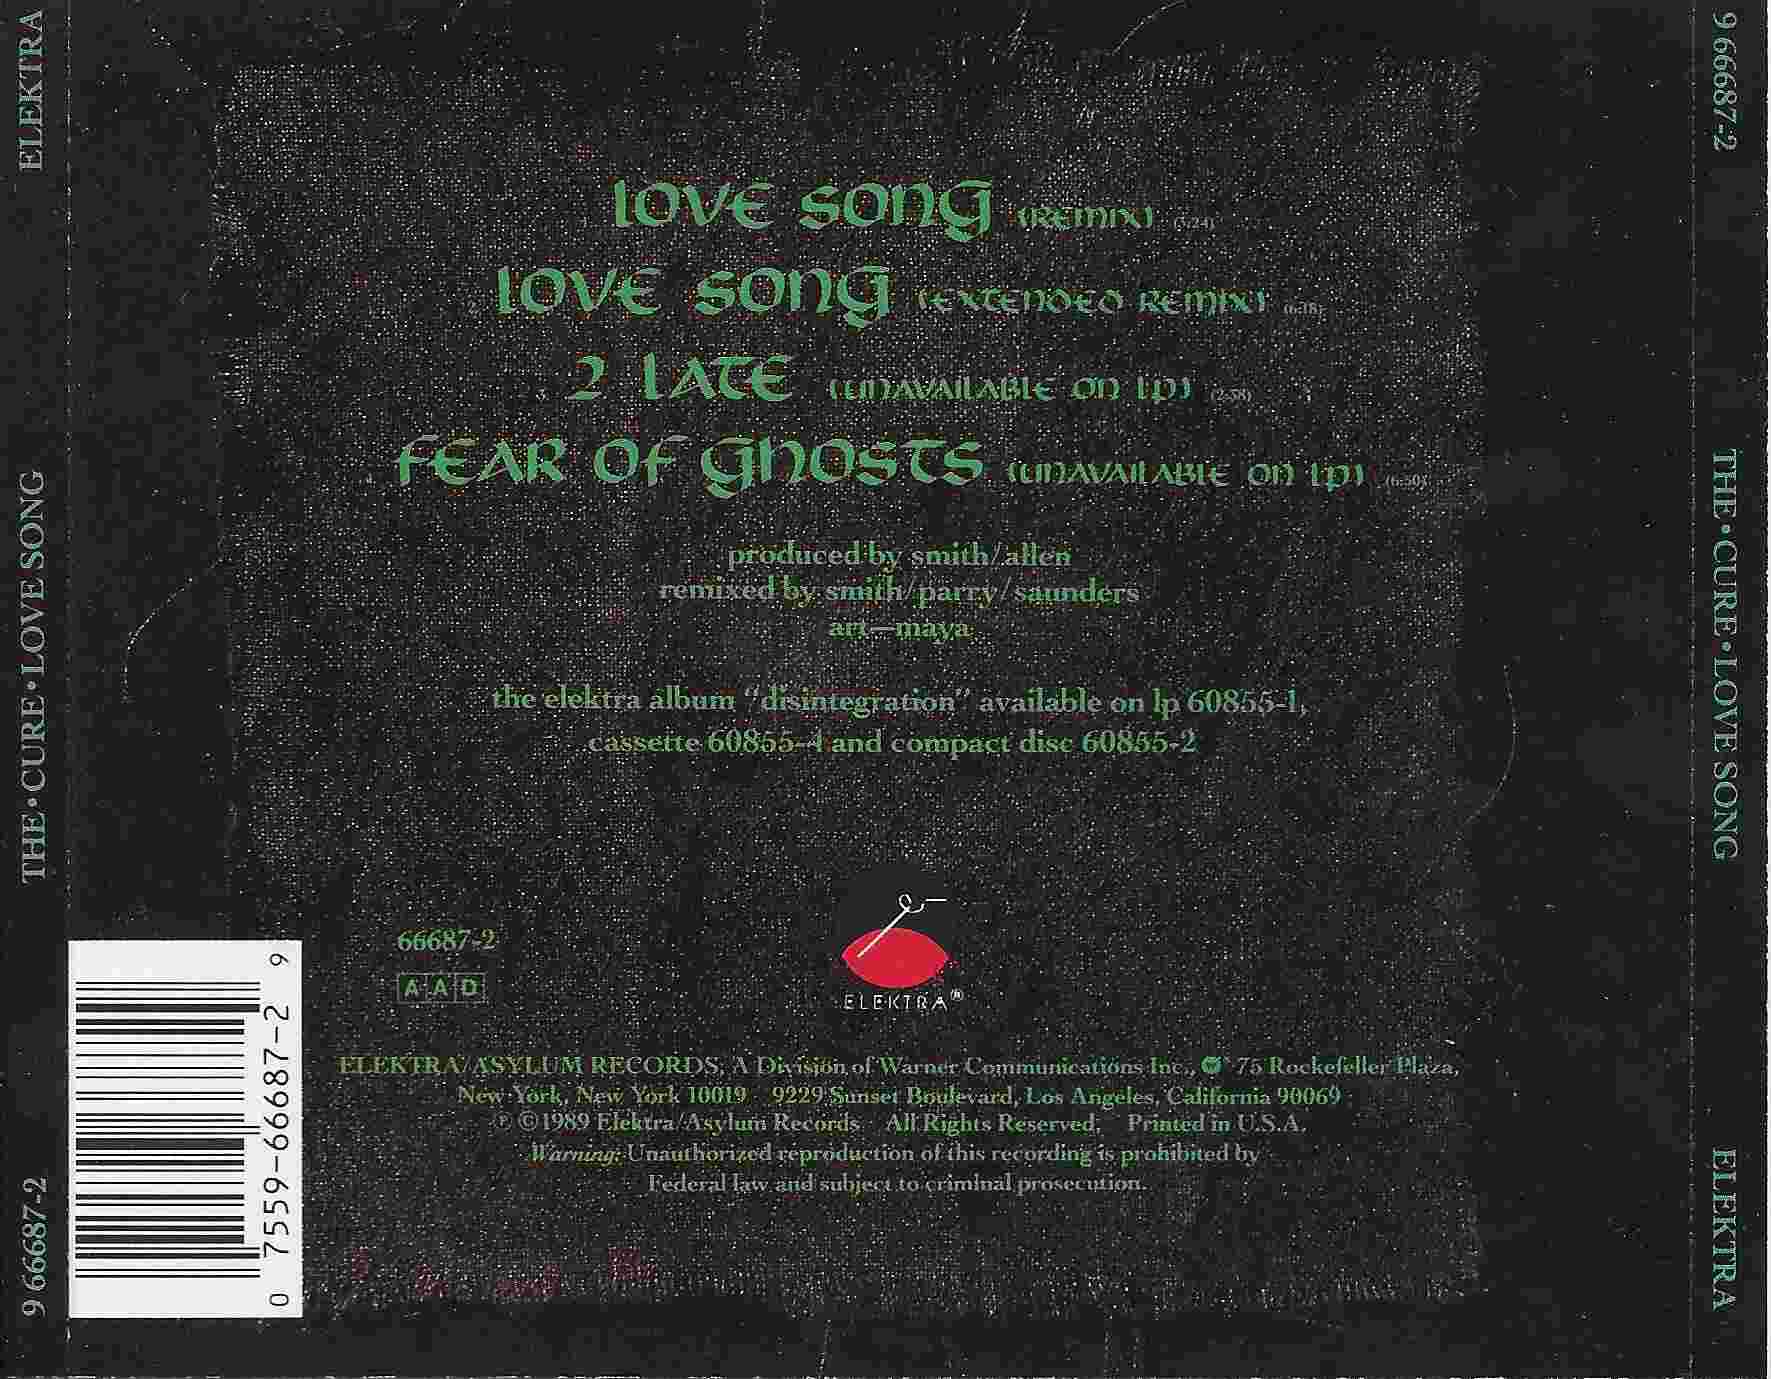 Picture of 66887 - 2 Lovesong by artist The Cure 